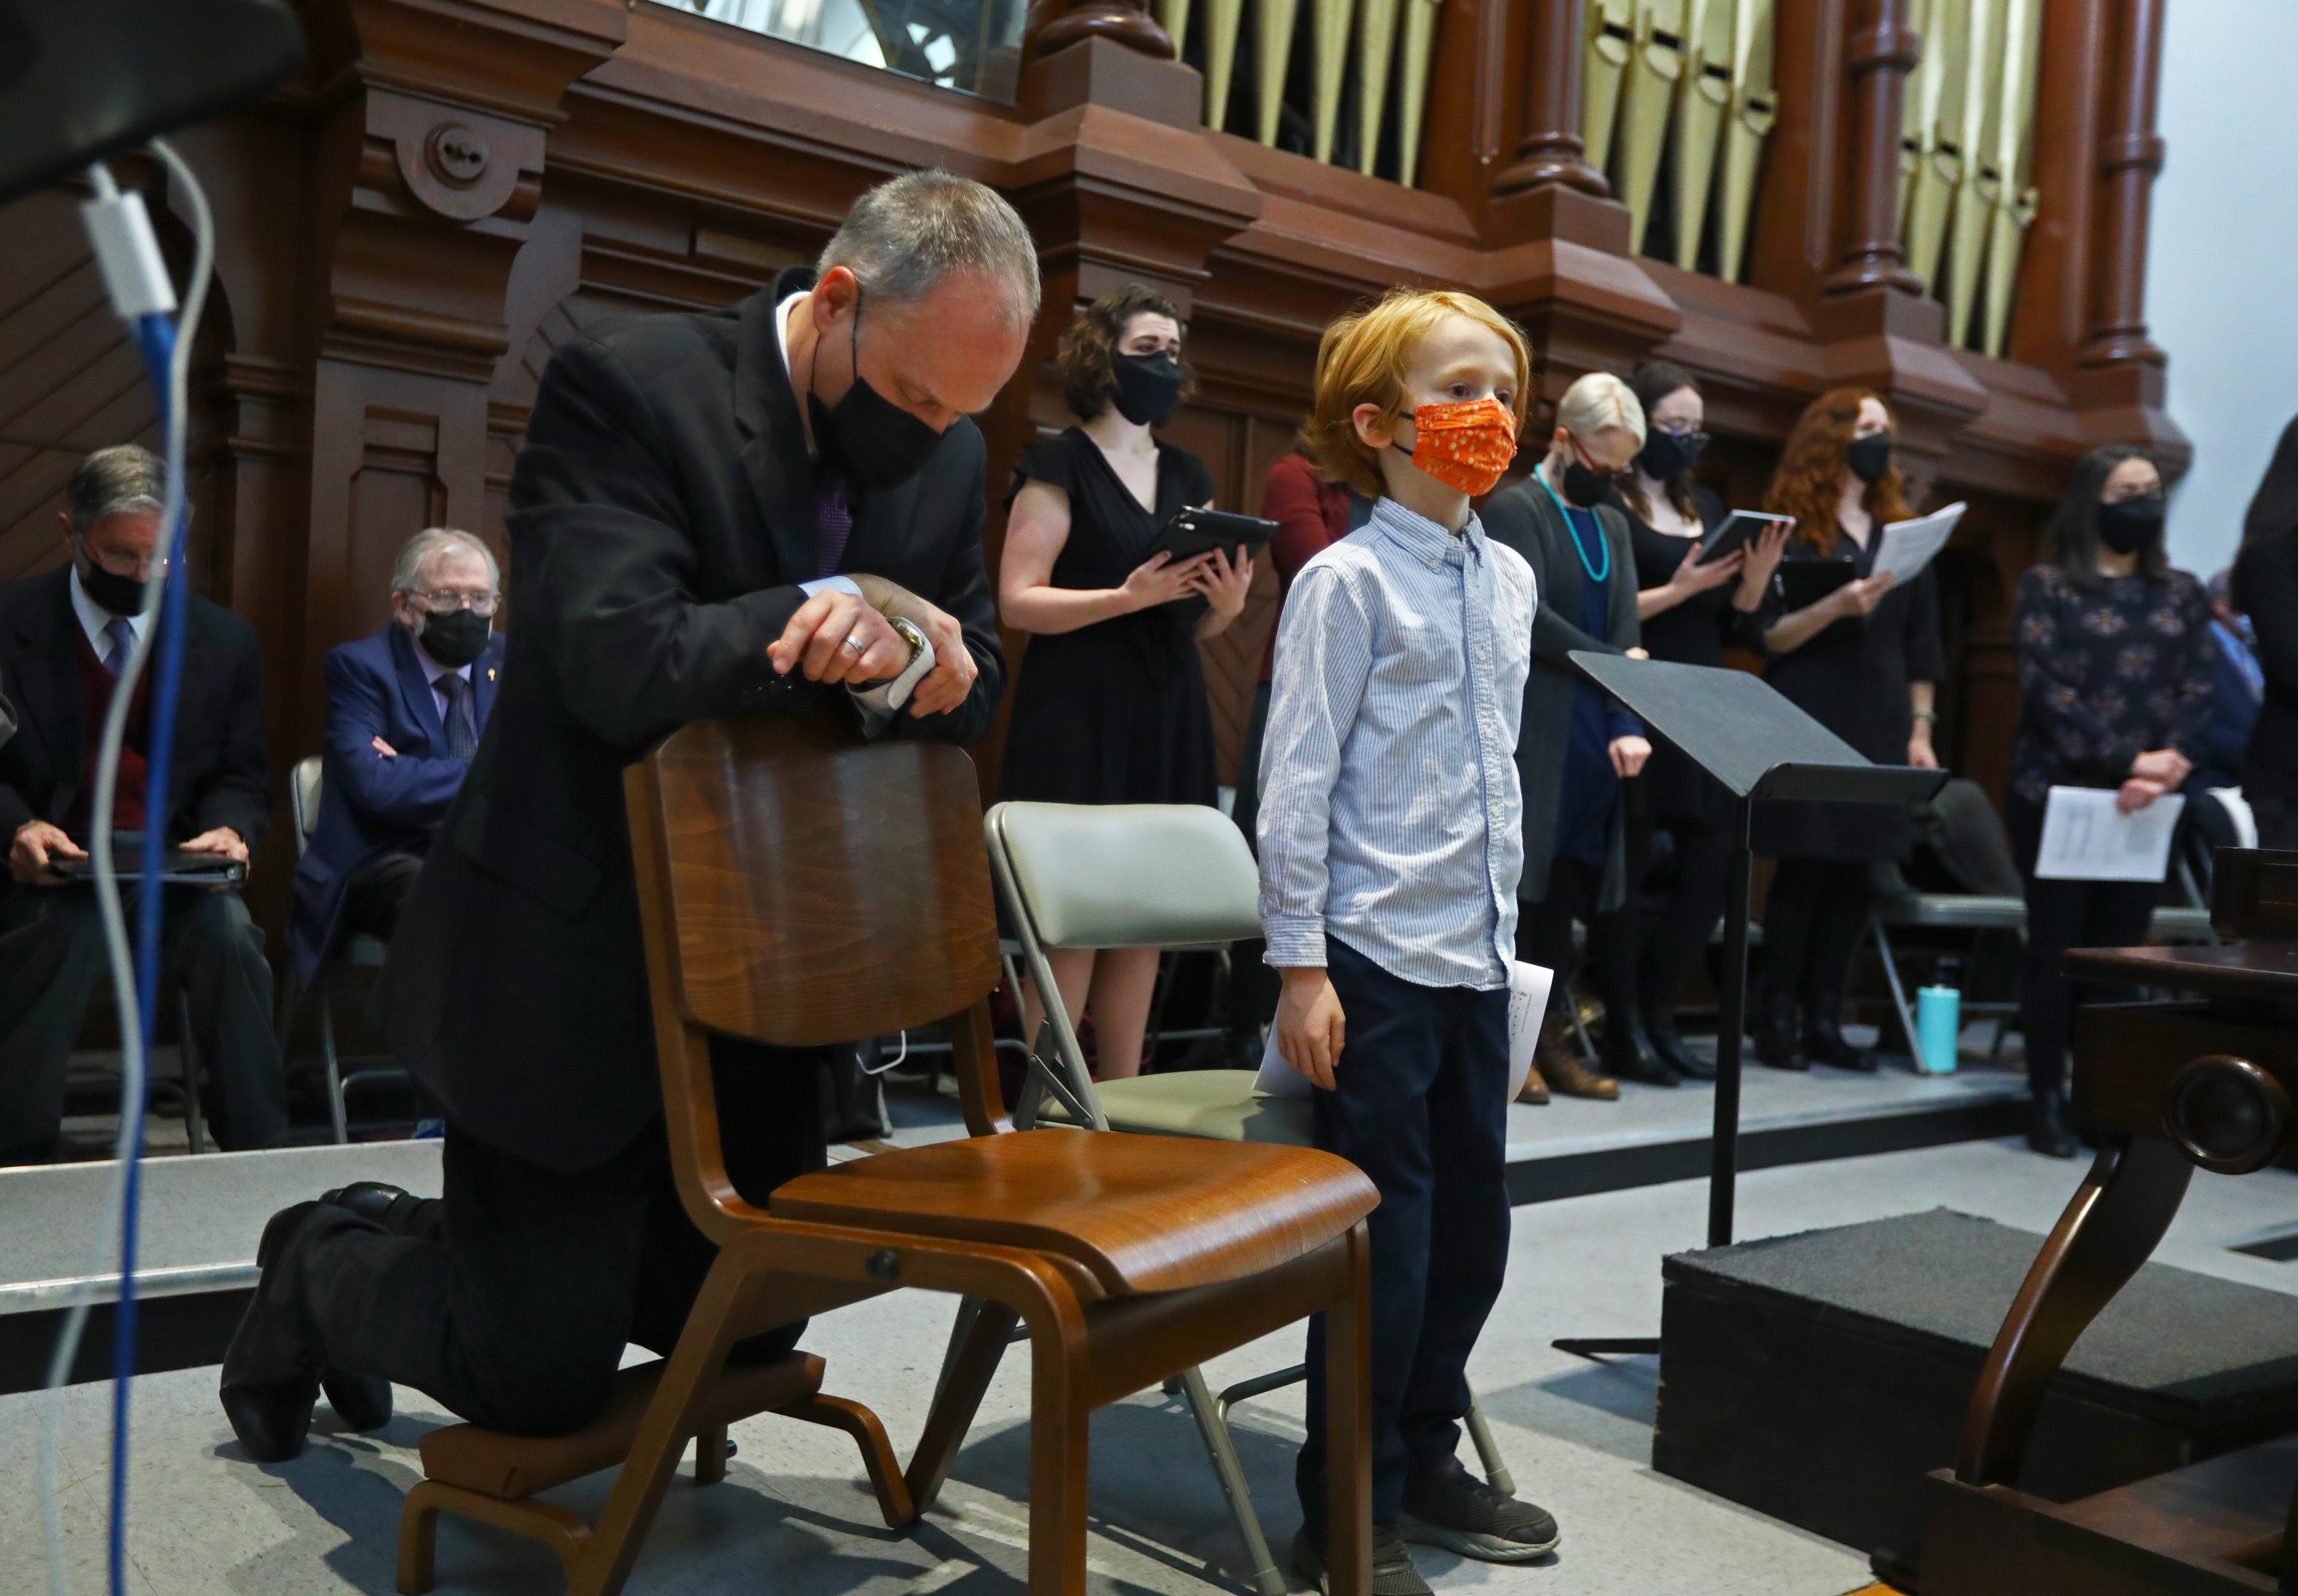 Richard Clark knelt while preparing for Holy Communion with his 7 year old son Sean Clark by his side.